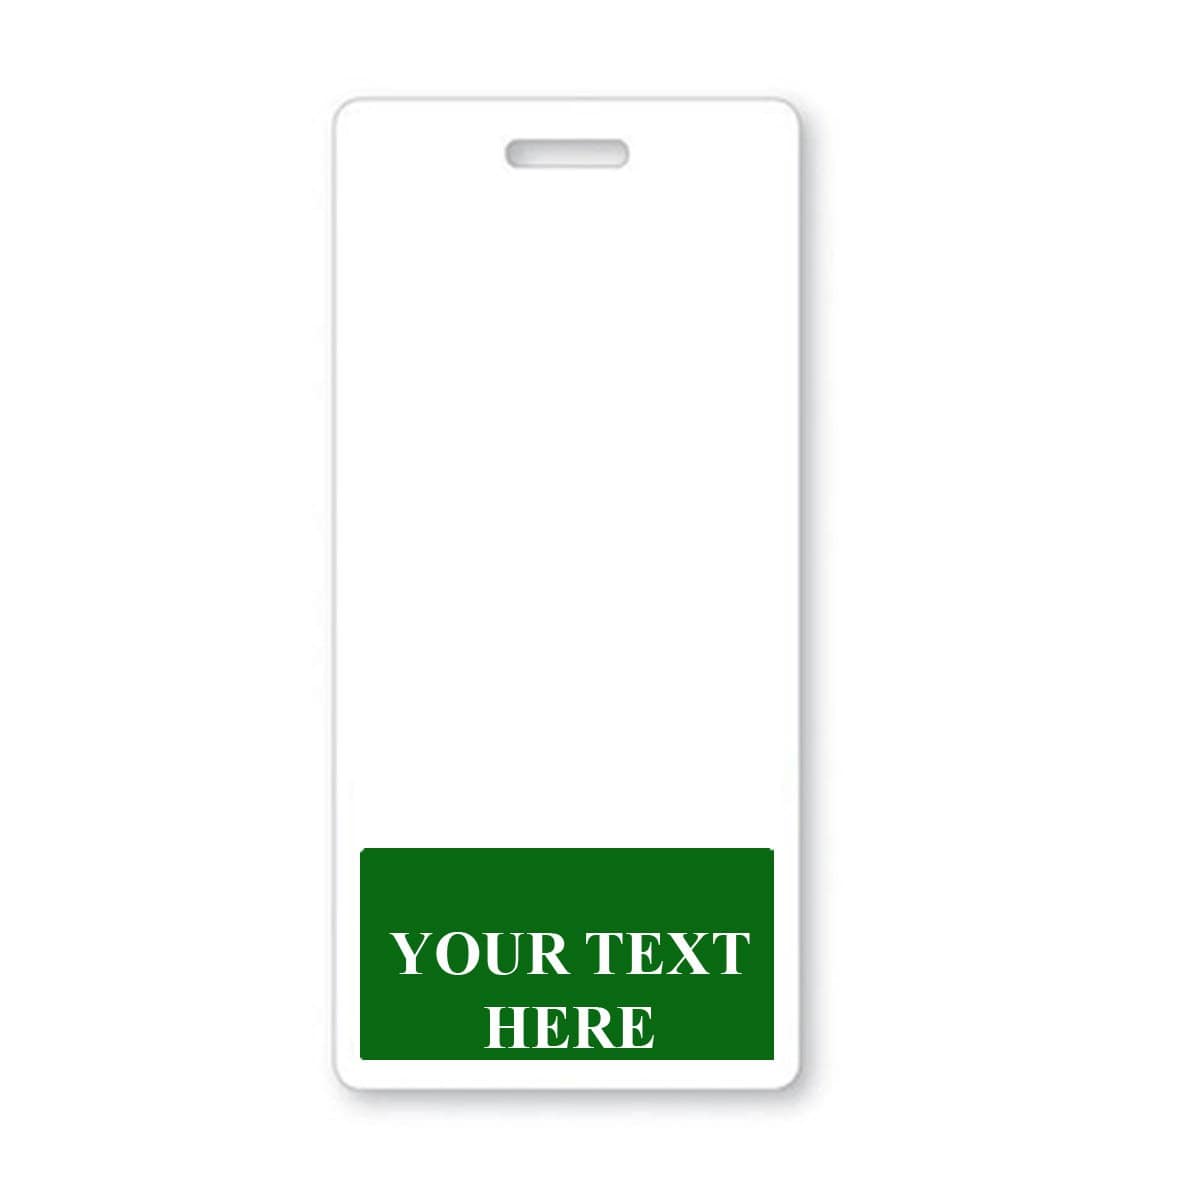 A Custom Printed Badge Buddy Vertical (Standard Size) with a green section at the bottom labeled "YOUR TEXT HERE" provides an ideal template for custom badge buddies, perfect for enhancing identification badges.